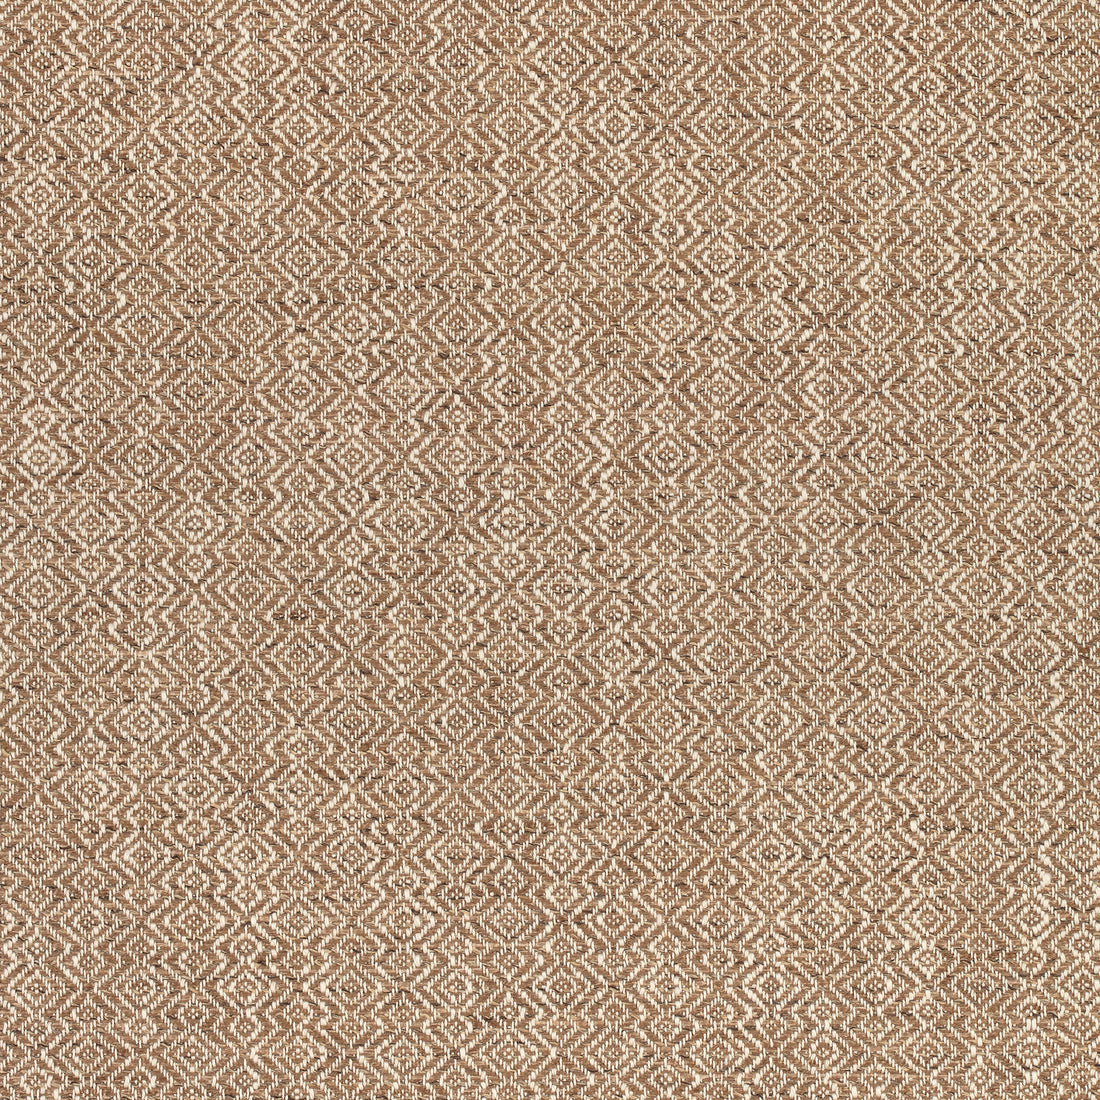 Kingsley fabric in bark color - pattern number W74066 - by Thibaut in the Cadence collection